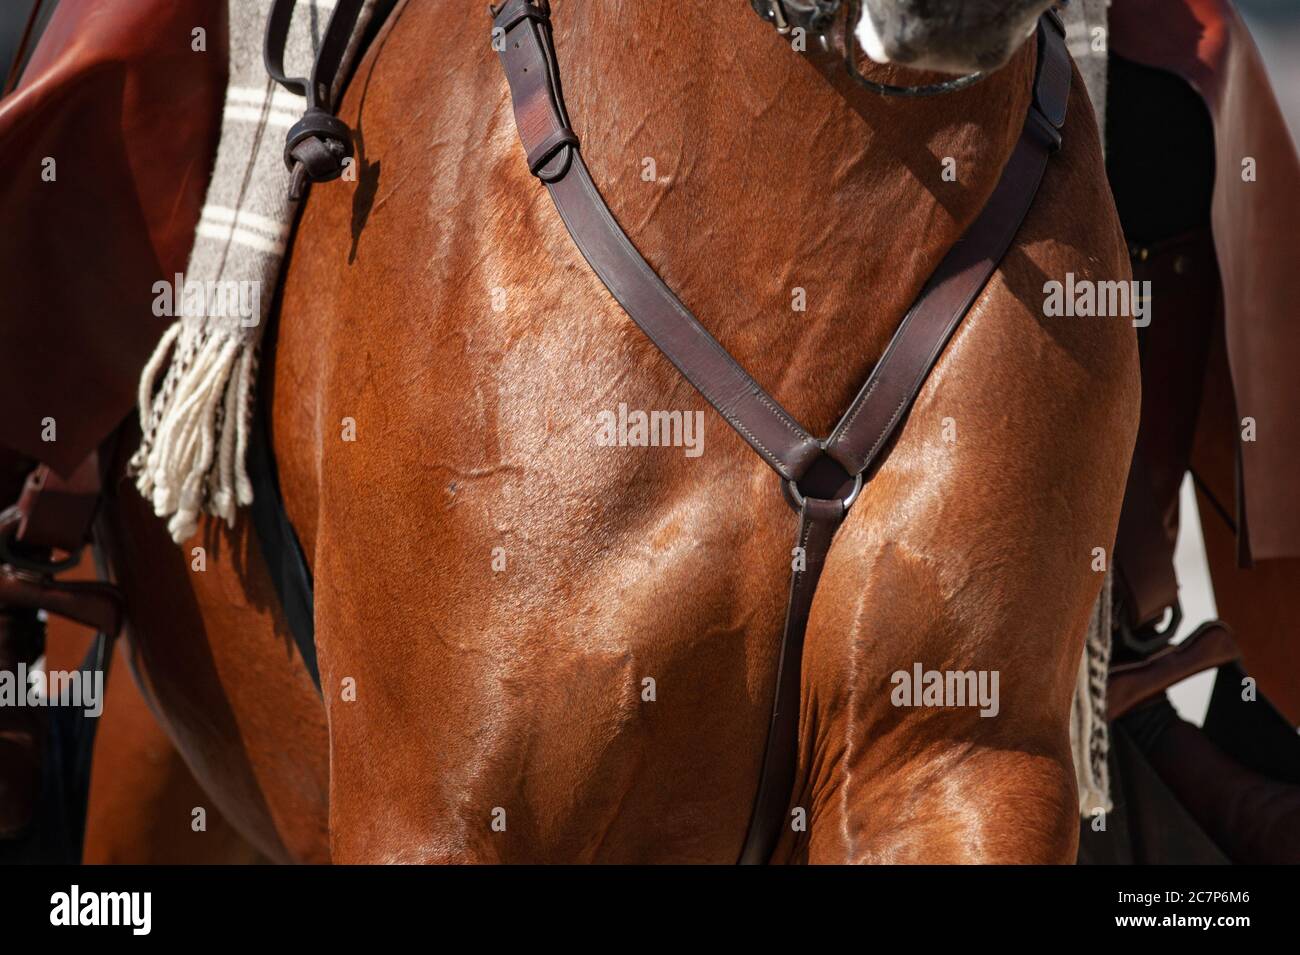 Saddle horse chest closeup with rider Stock Photo